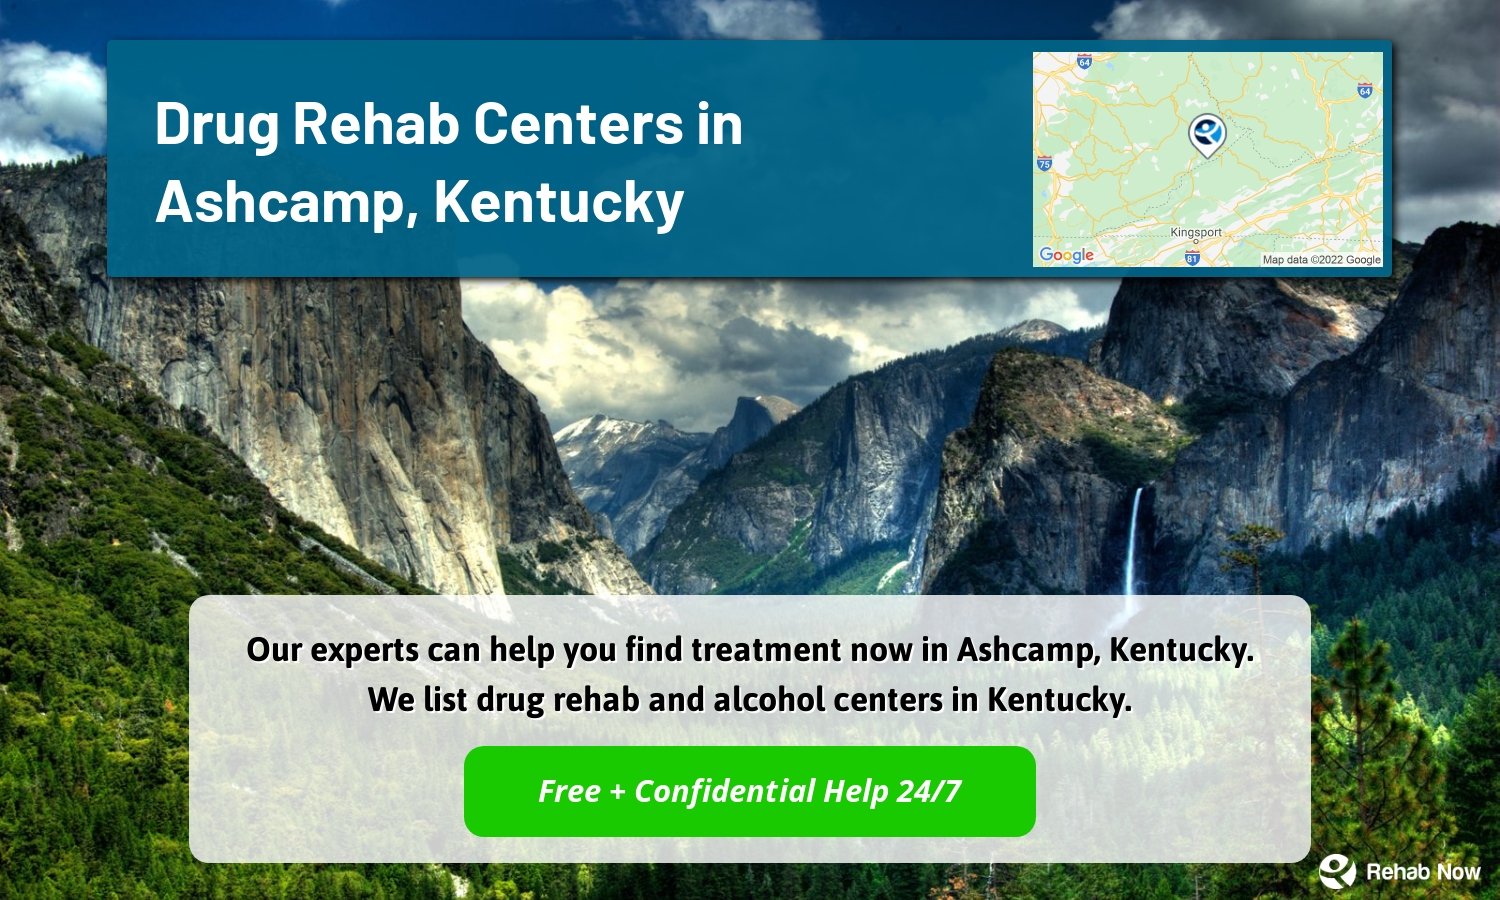 Our experts can help you find treatment now in Ashcamp, Kentucky. We list drug rehab and alcohol centers in Kentucky.